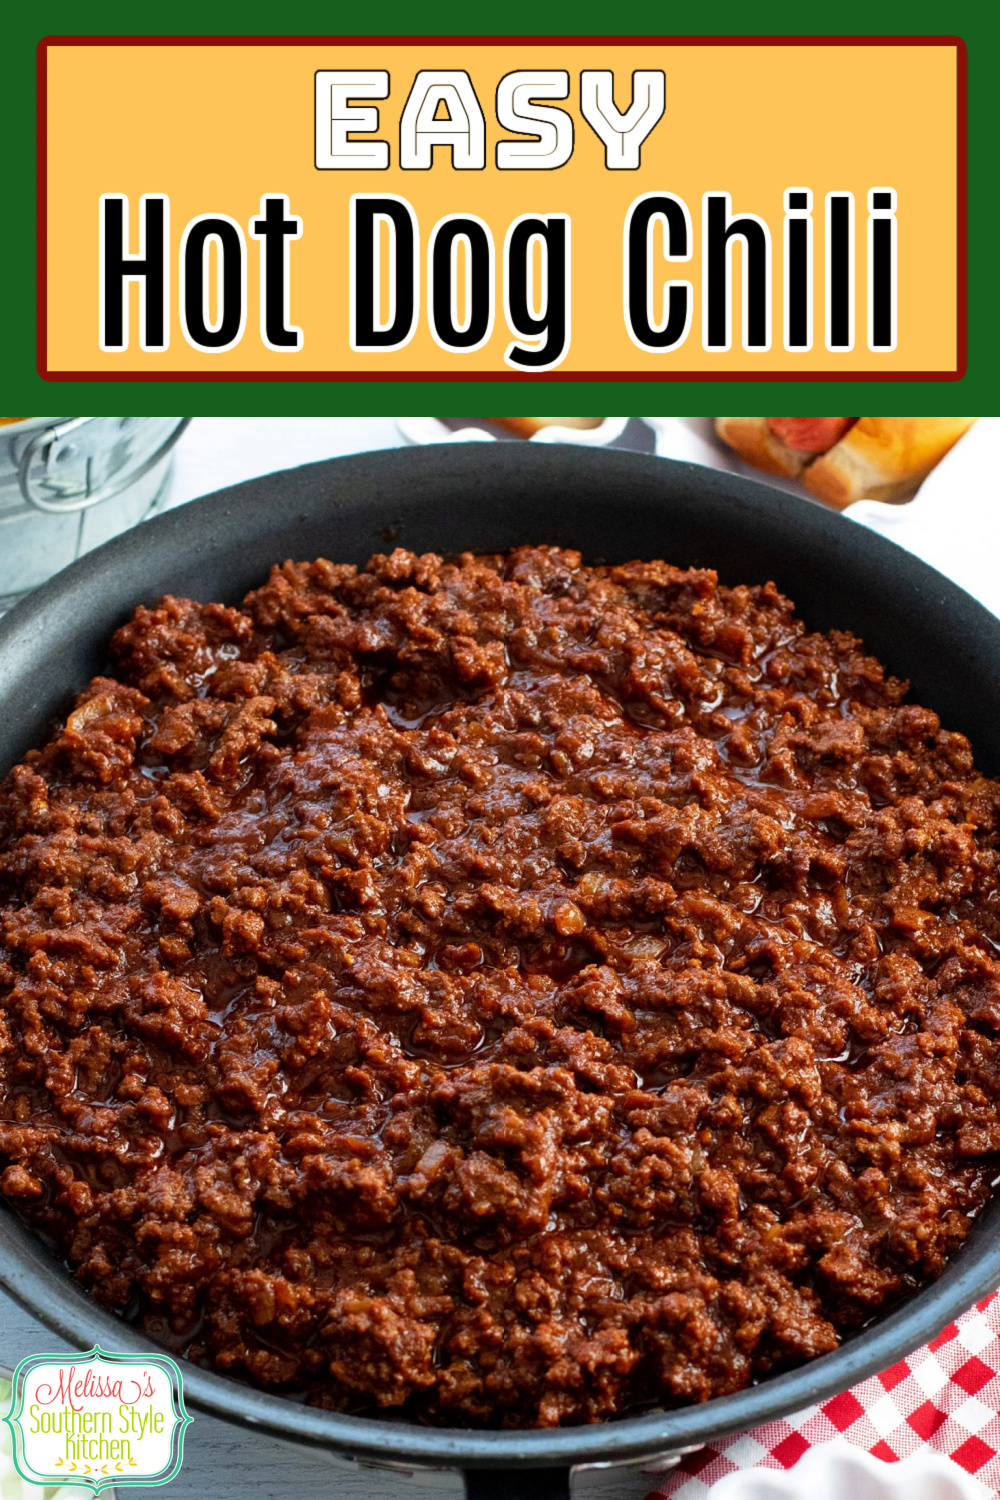 Serve this Easy Hot Dog Chili as a featured topping for hot dogs at your next backyard soiree #easyhotdogchili #chilirecipes #hotdogs #condiments #southernchili #bestchilirecipes #easygroundbeefrecipes #chilidogs #homemadechilirecipe via @melissasssk